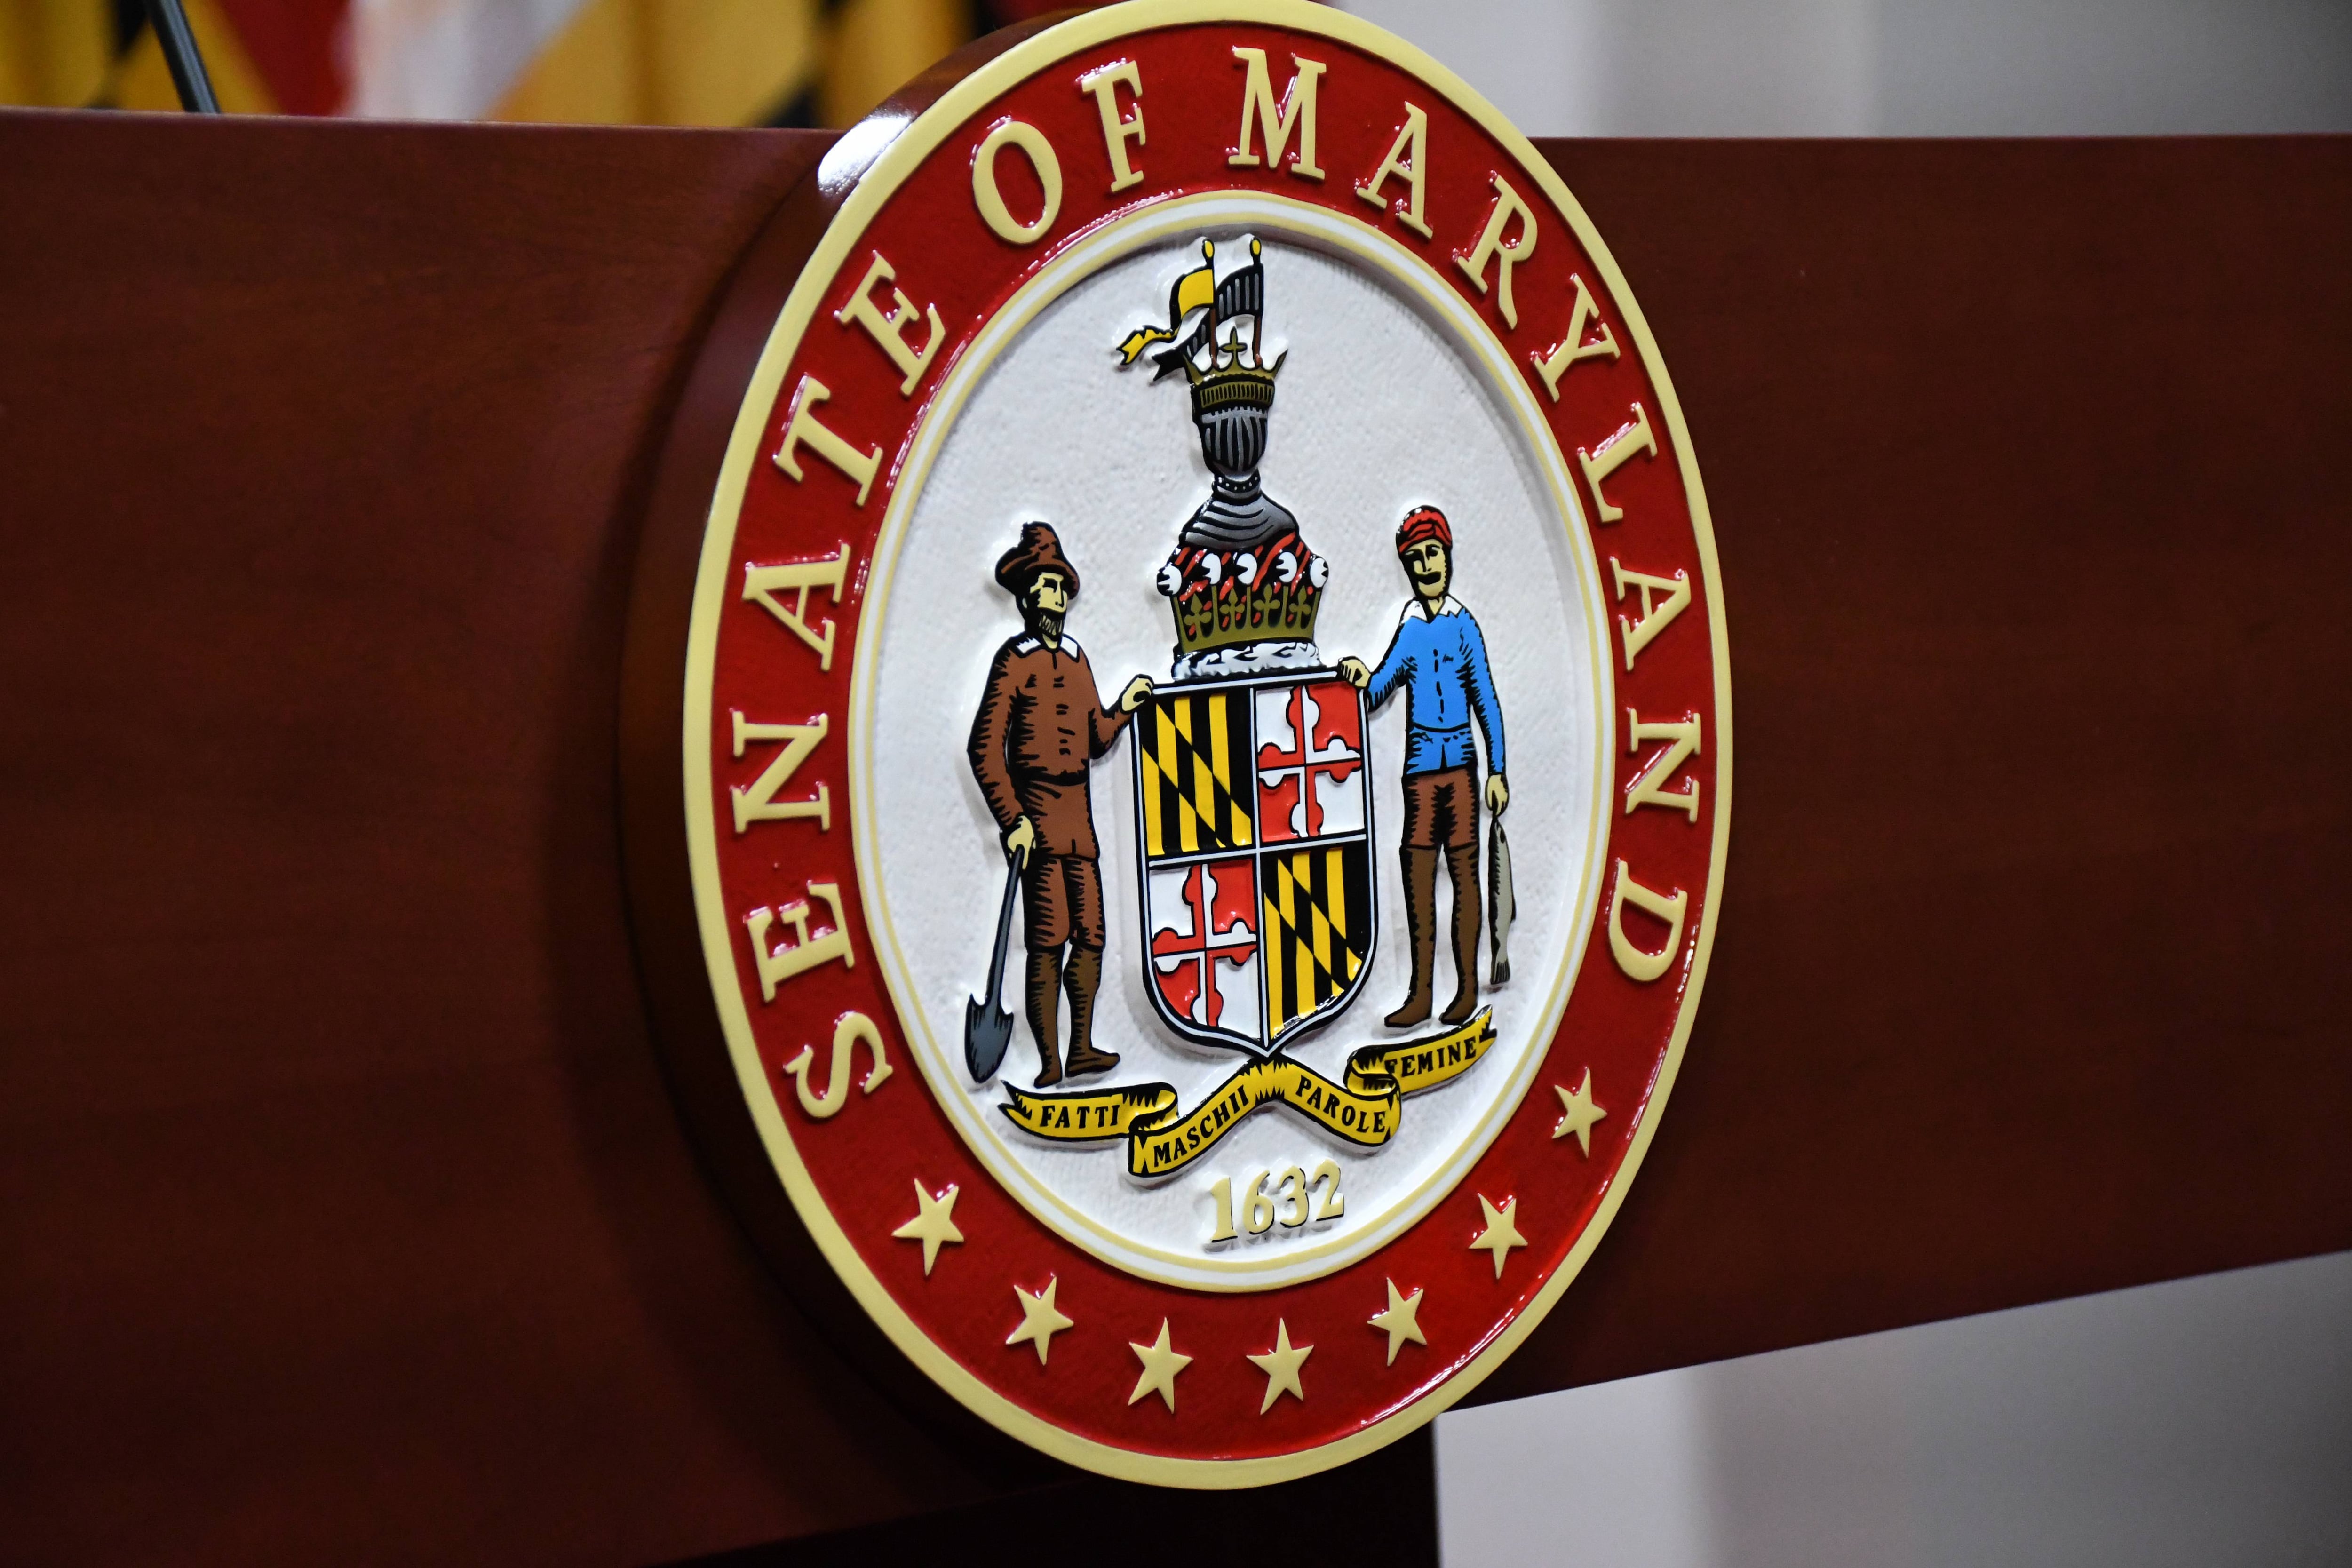 The seal of the Senate of Maryland on a podium in the Miller Senate Office Building in Annapolis.